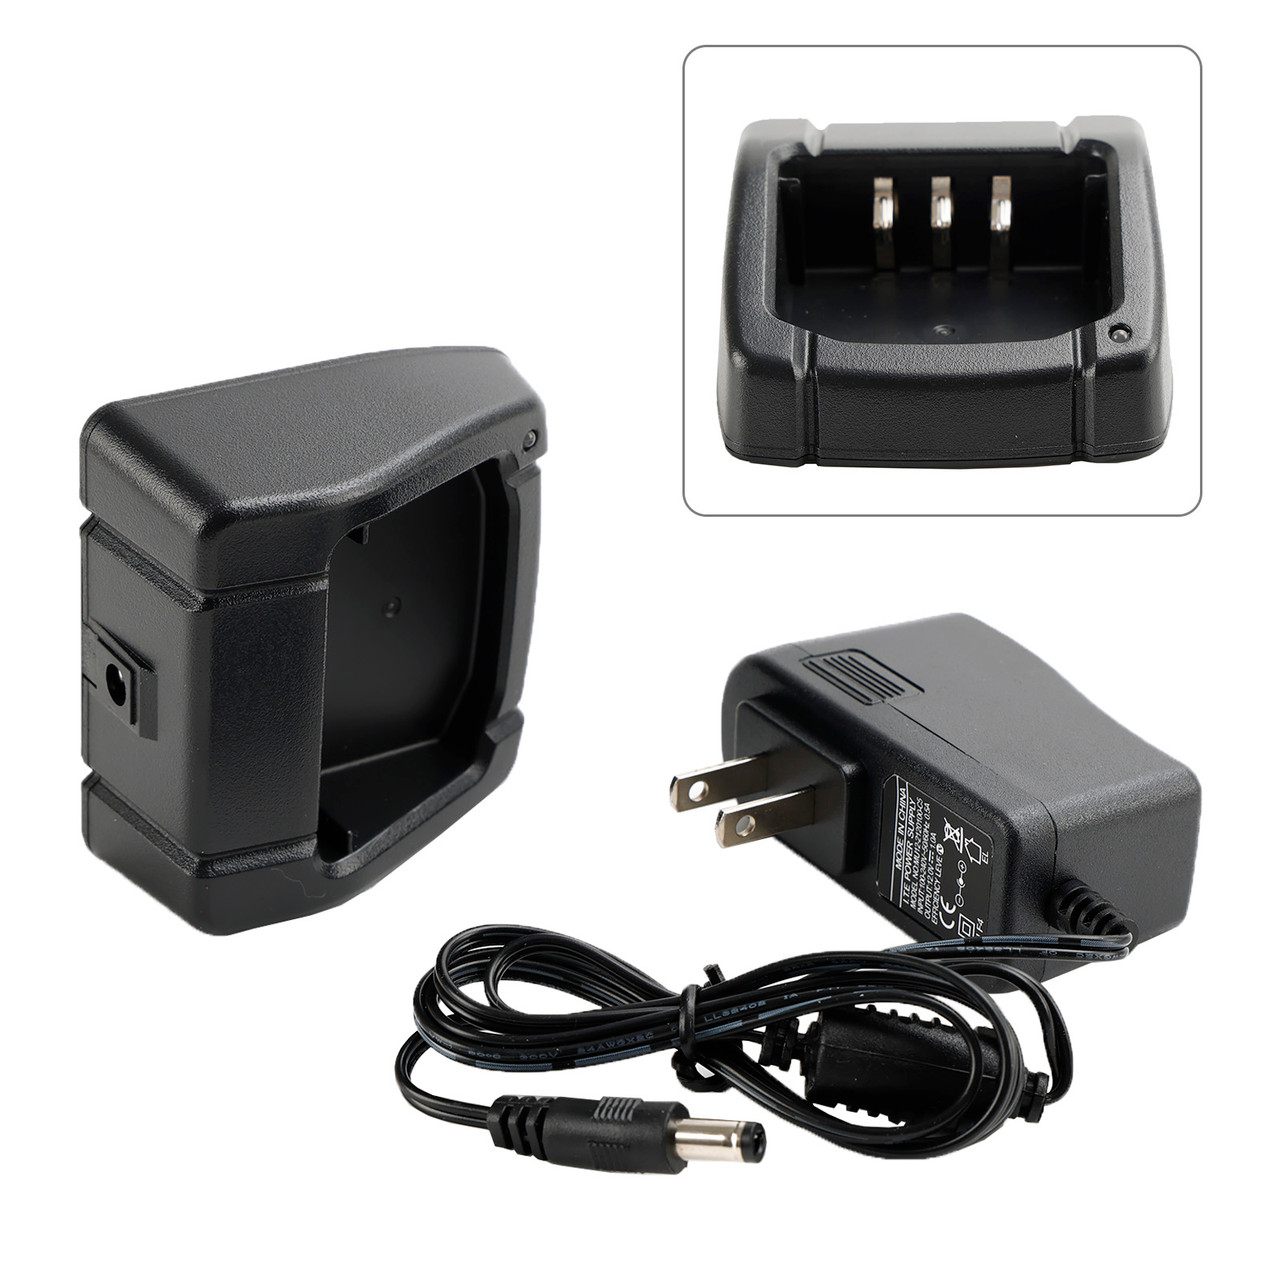 FT4XR Charger SBH-22 Battery Fast Rapid Dock for YAESU FT4X FT4XR FT25R FT65R US